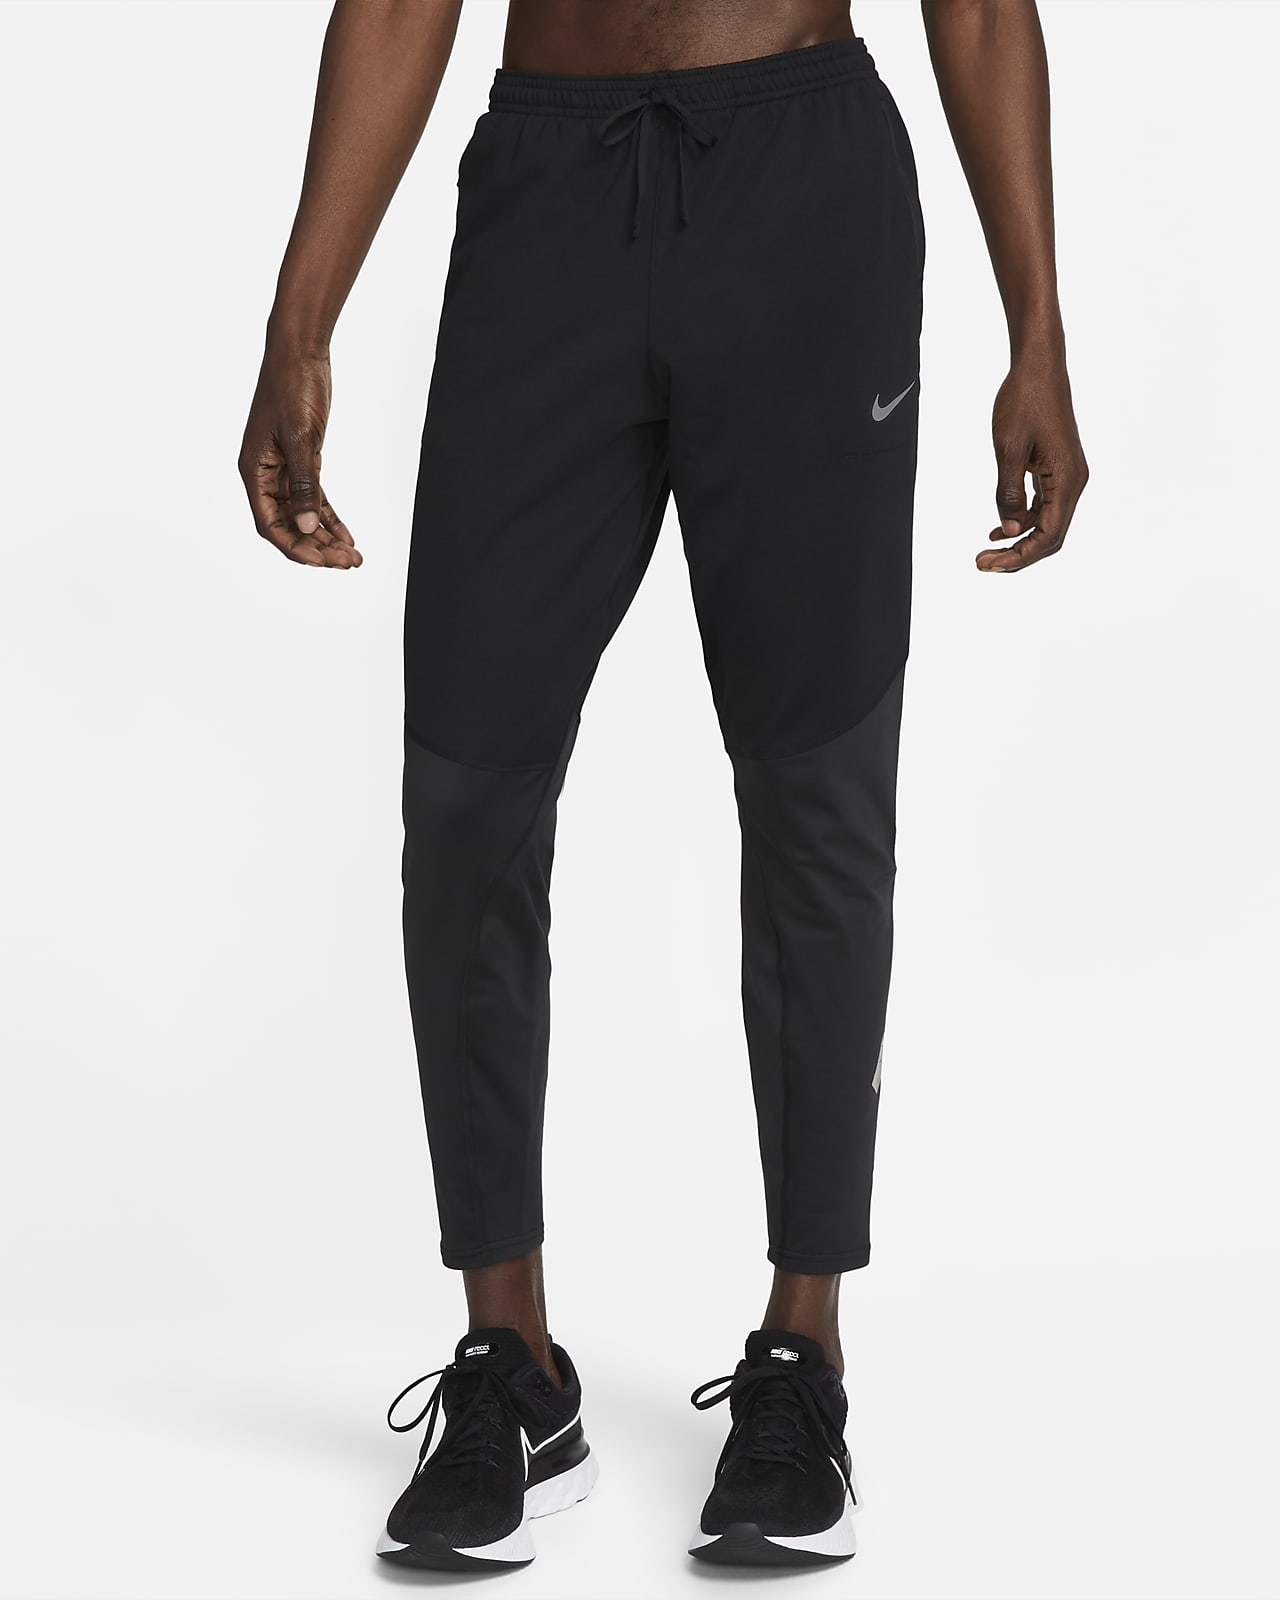 Contour lexicon Humanistisch Nike Therma-FIT Run Division Elite Men's Running Pants. Nike.com